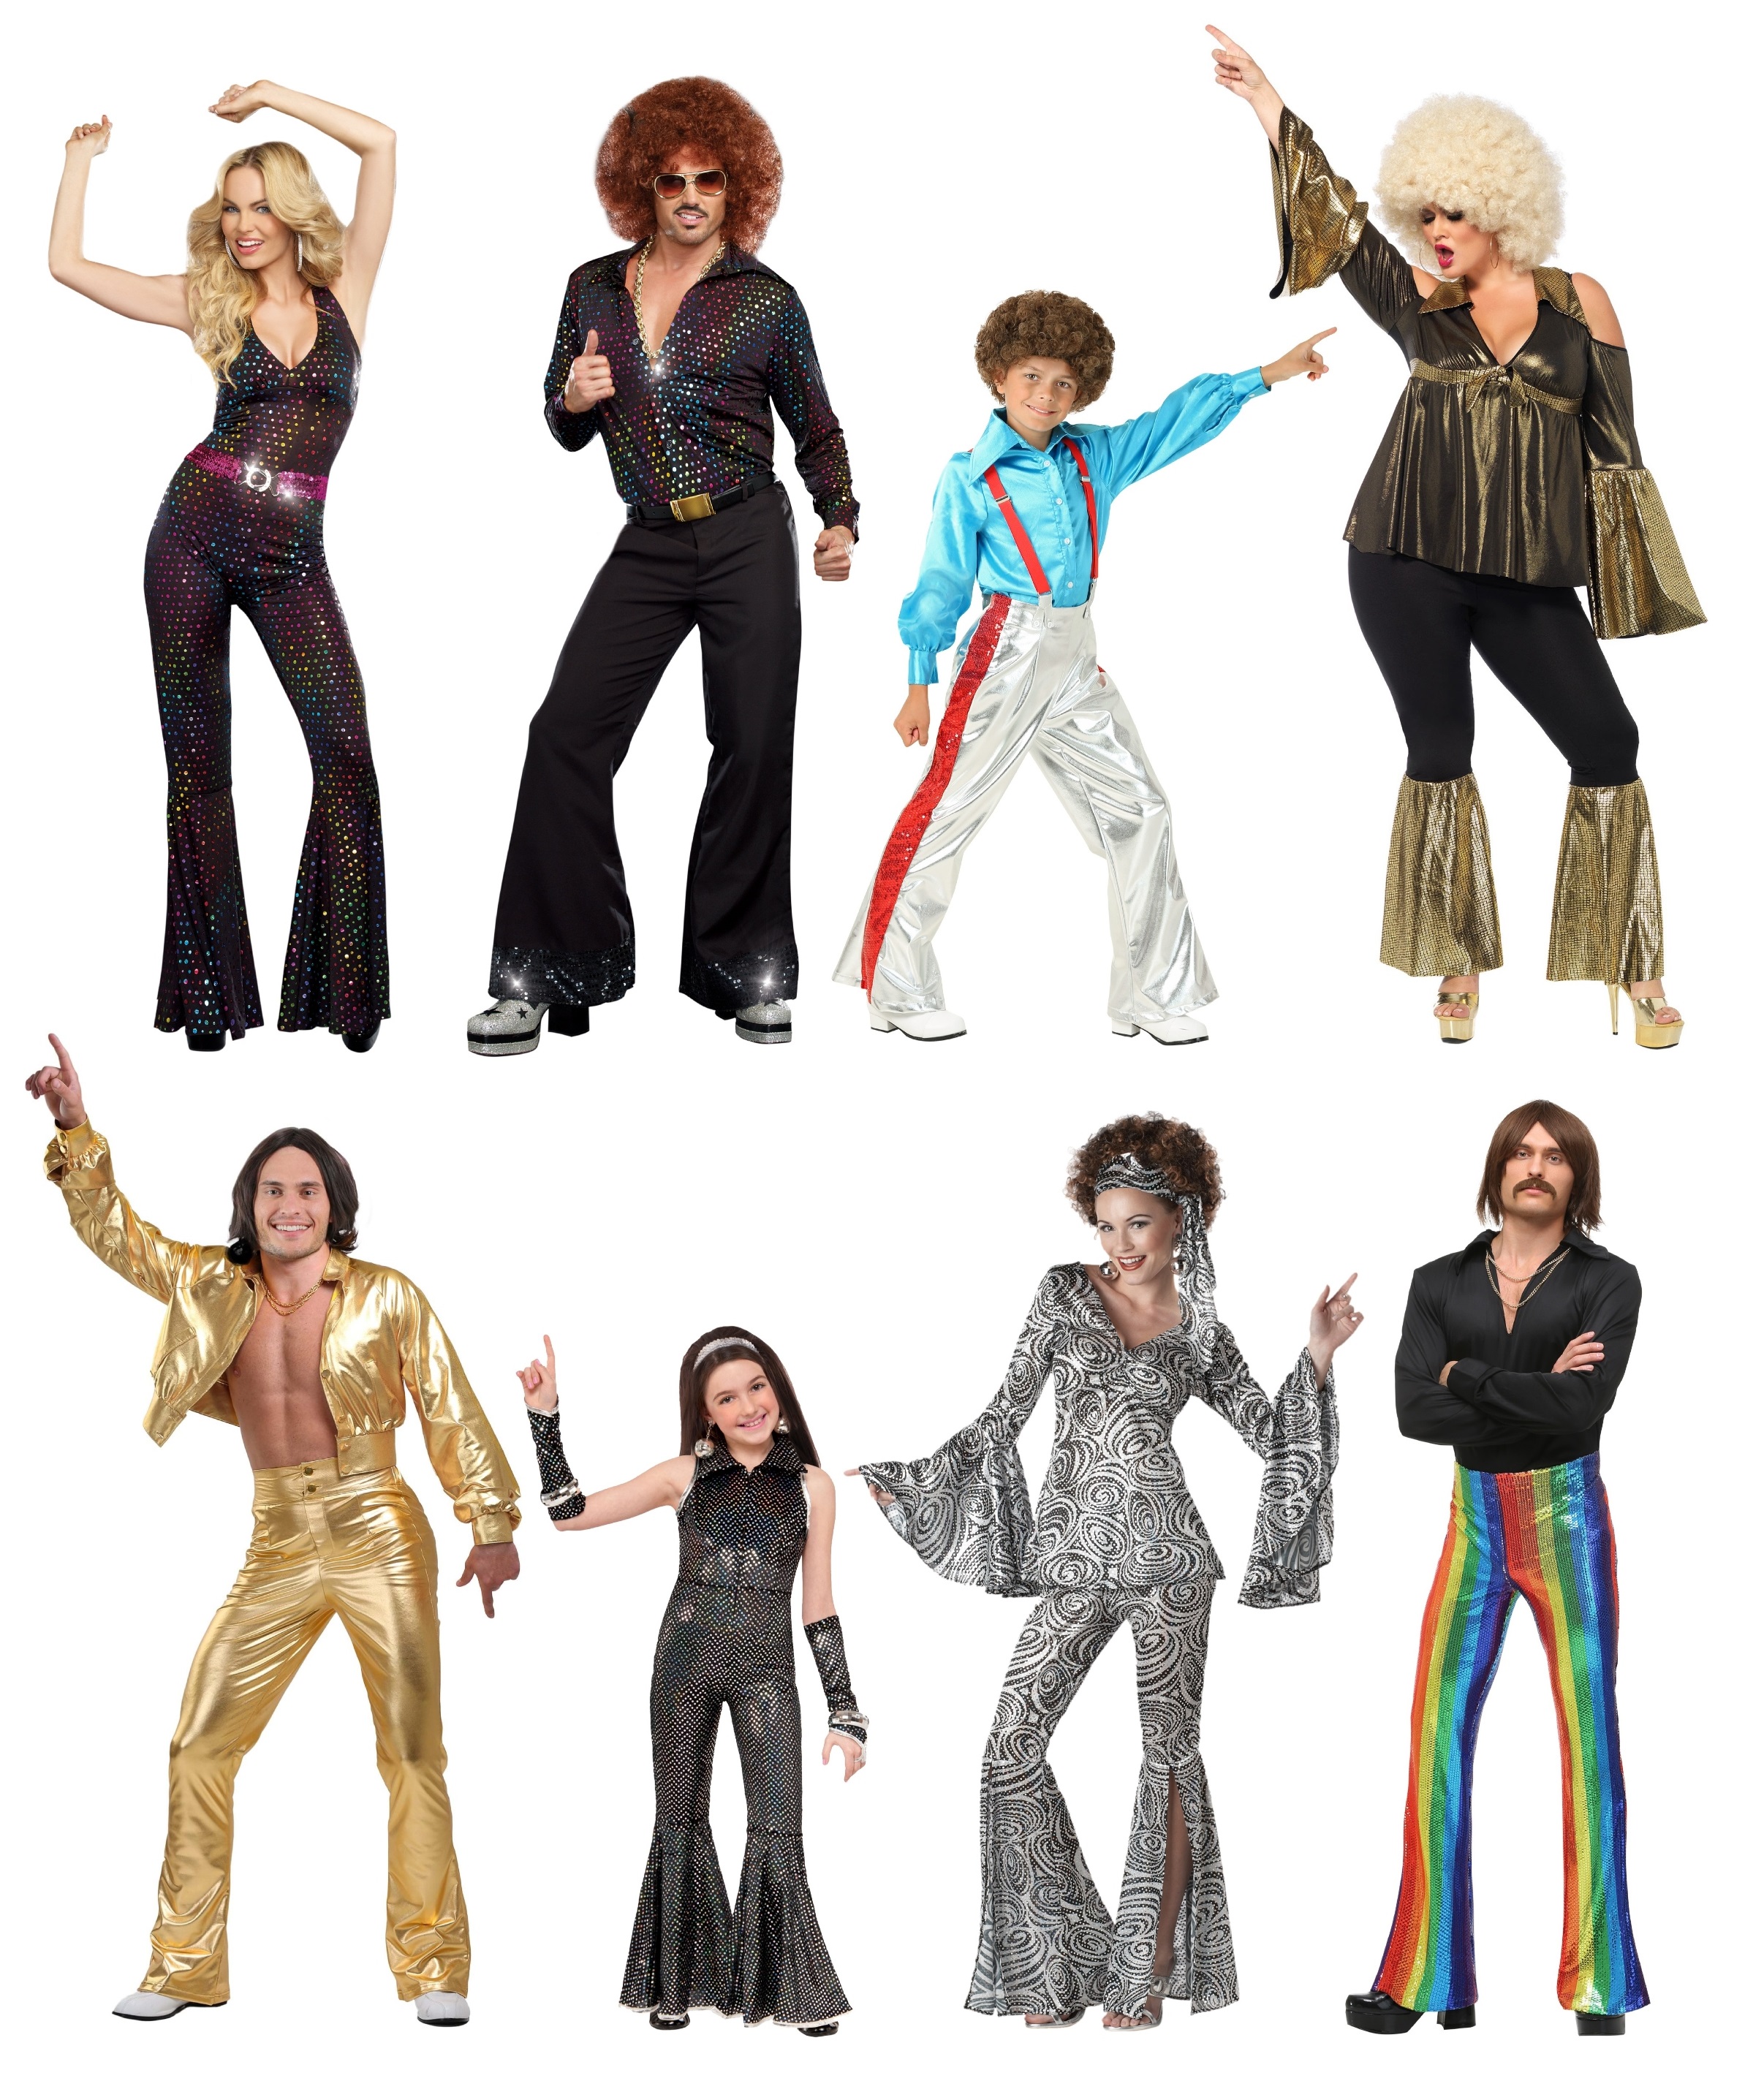 These Costumes to Dance In Will Turn You Into the Next Dancing Queen -   Blog